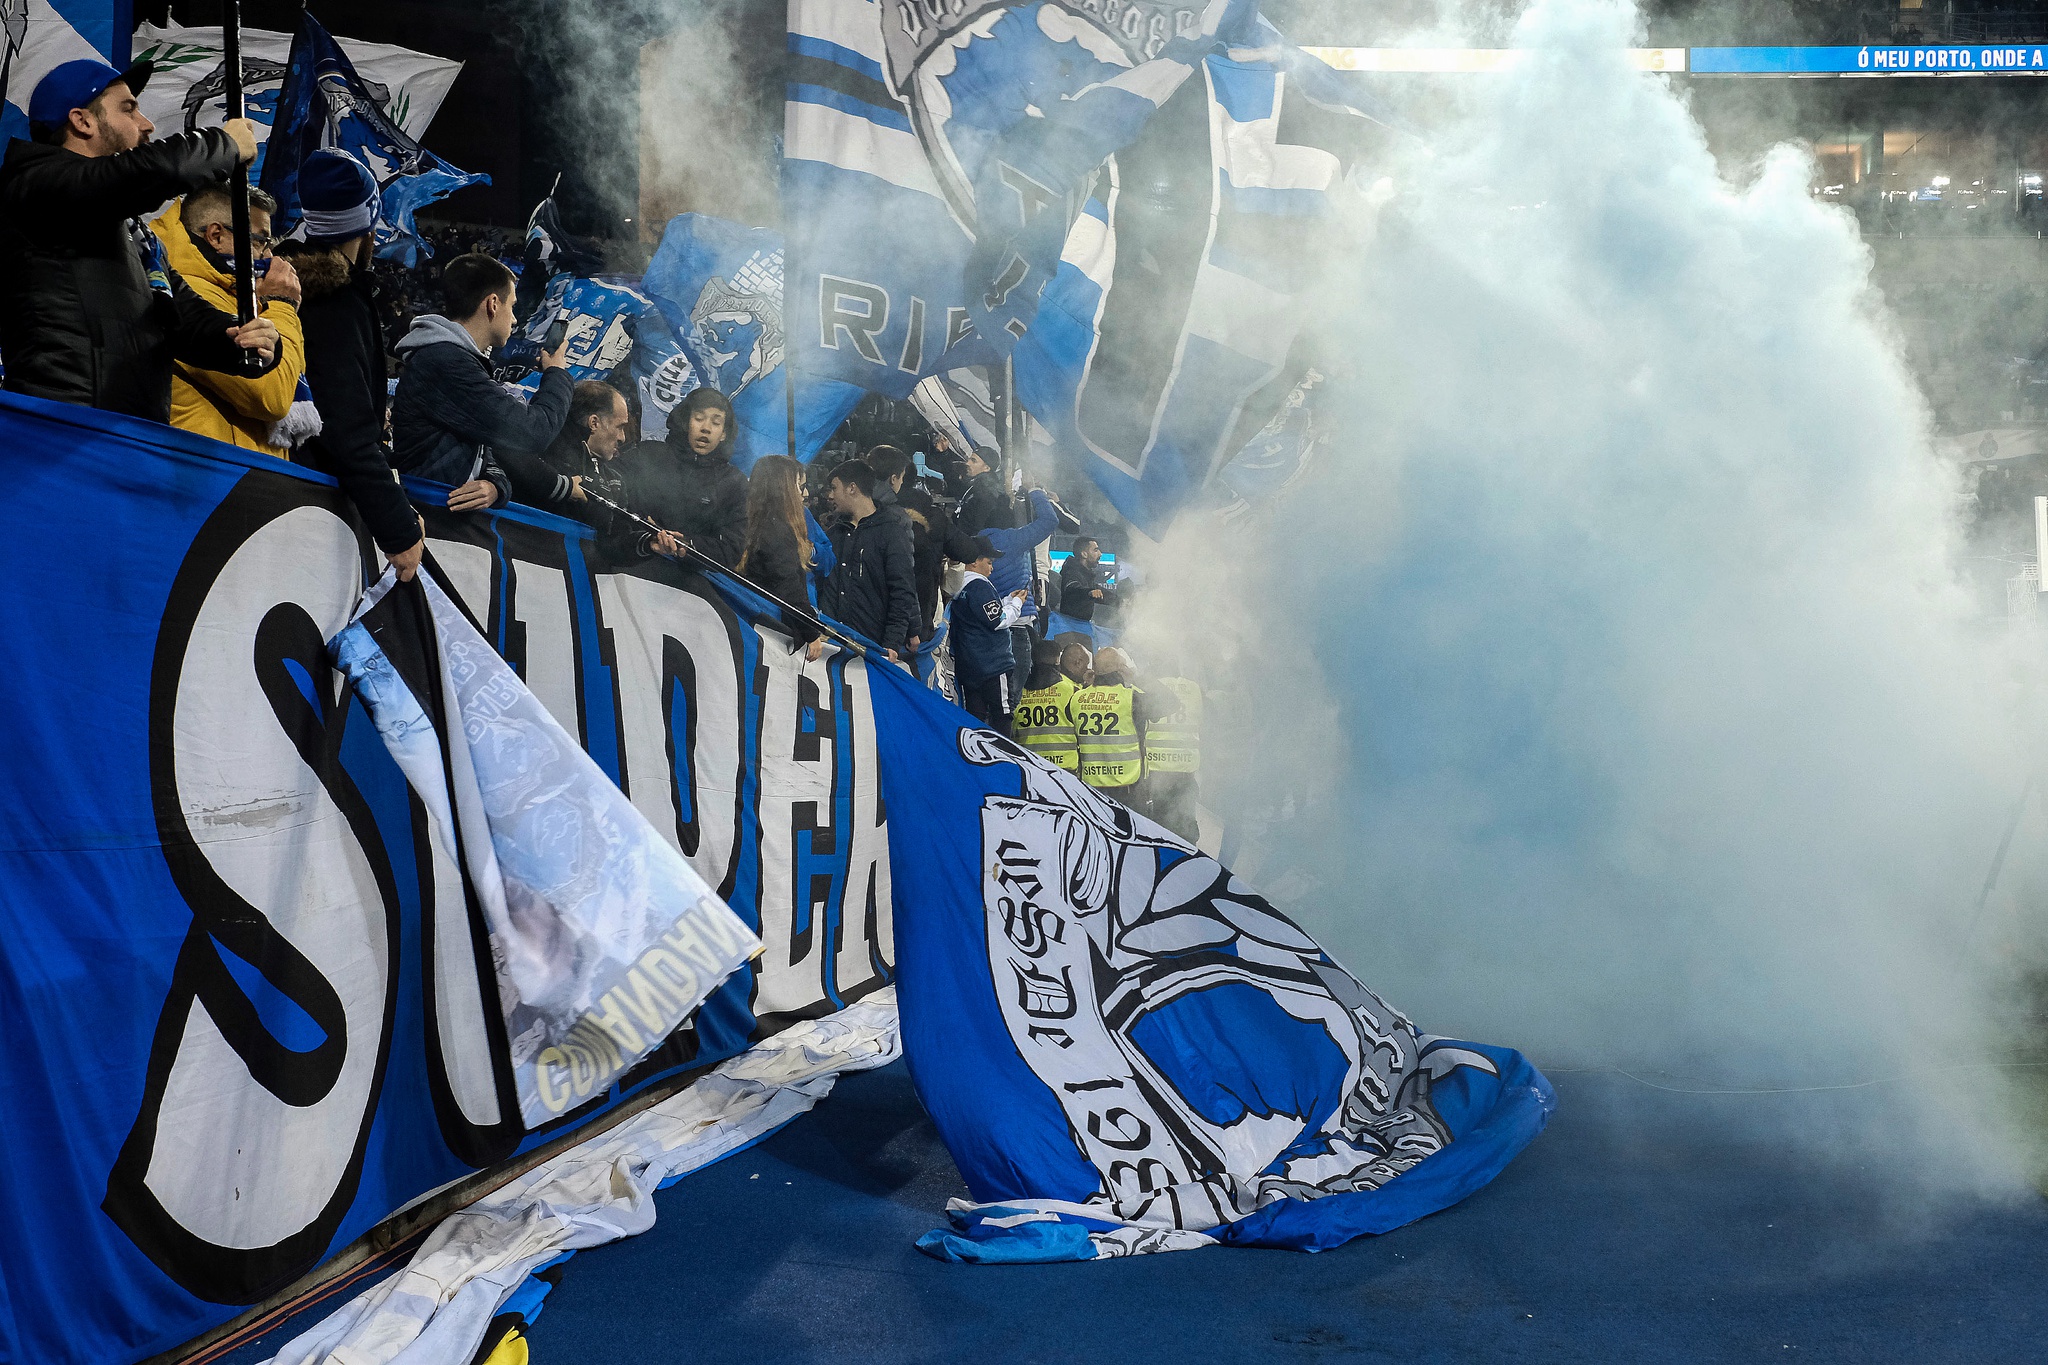 FC Porto banners were stolen from the museum and burned in Croatia  soccer